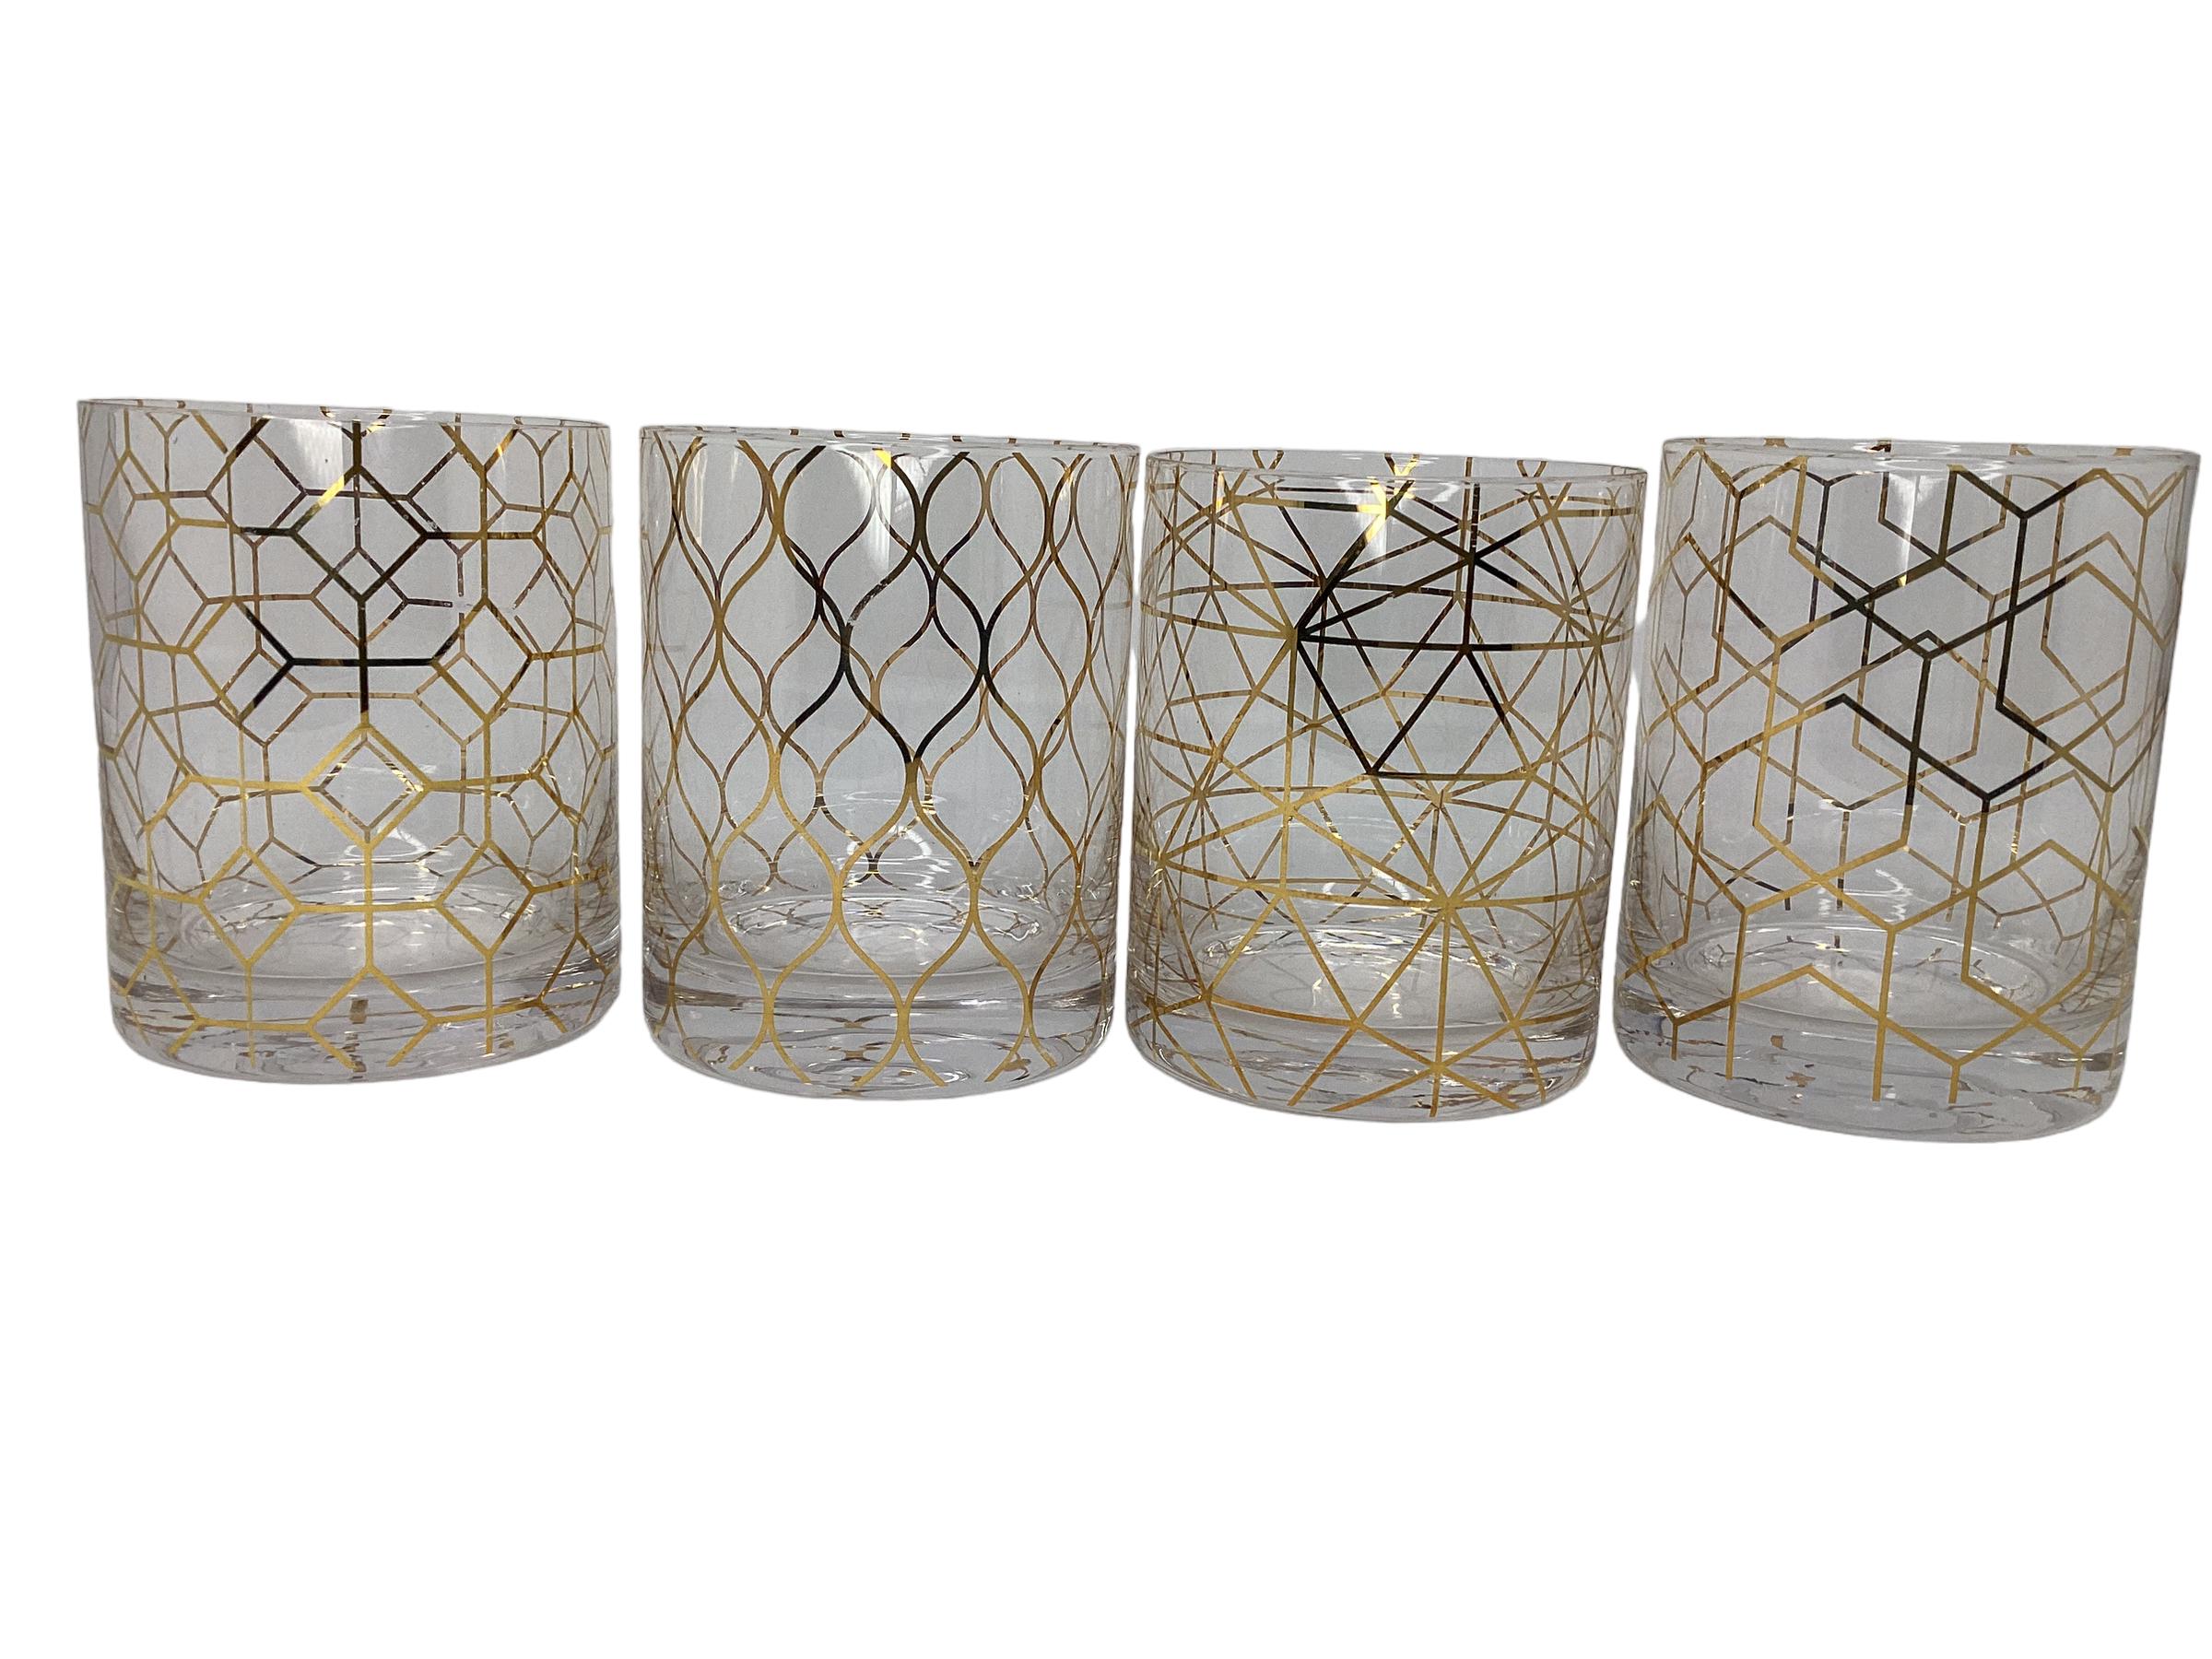 Set of four gold decorated rocks glasses, each with a different geometric design. All in excellent vintage condition.